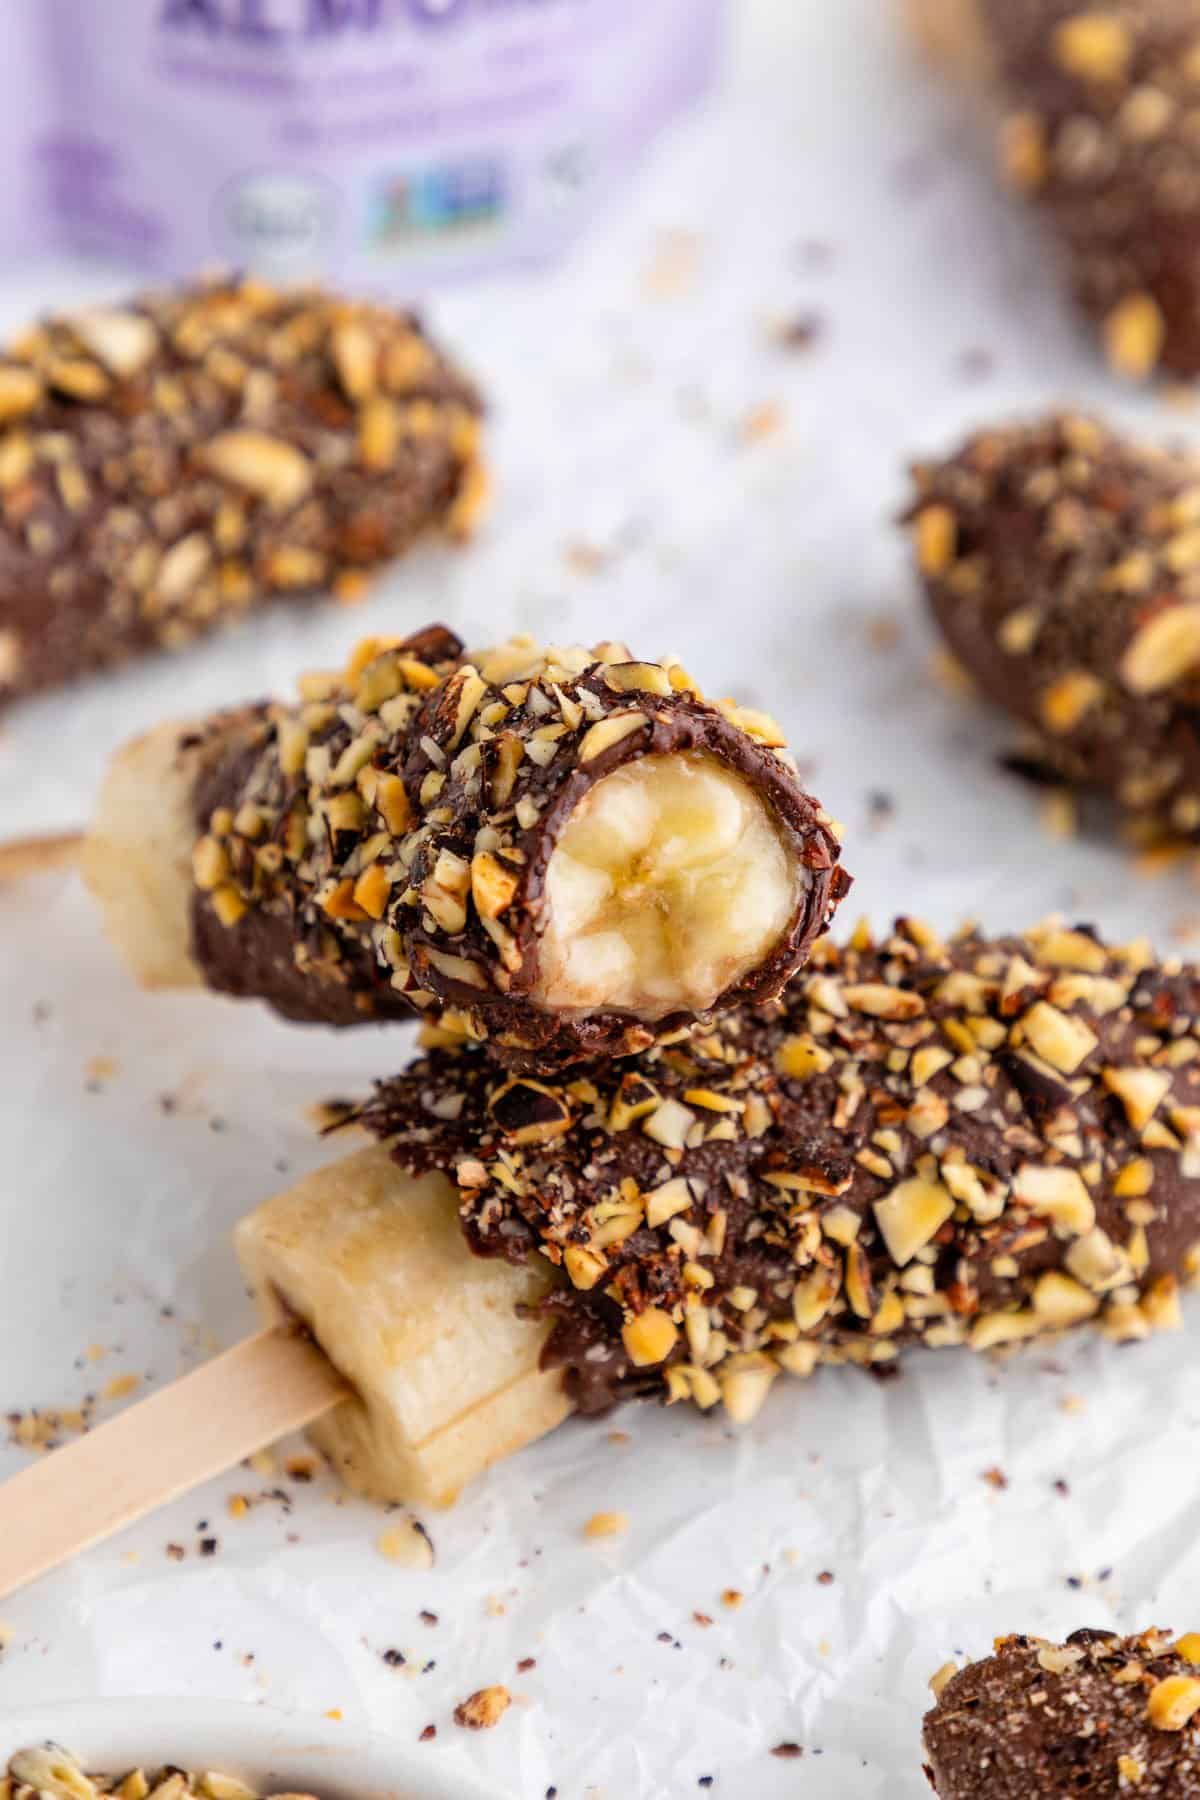 a half bitten chocolate covered frozen banana pop covered in crushed nuts